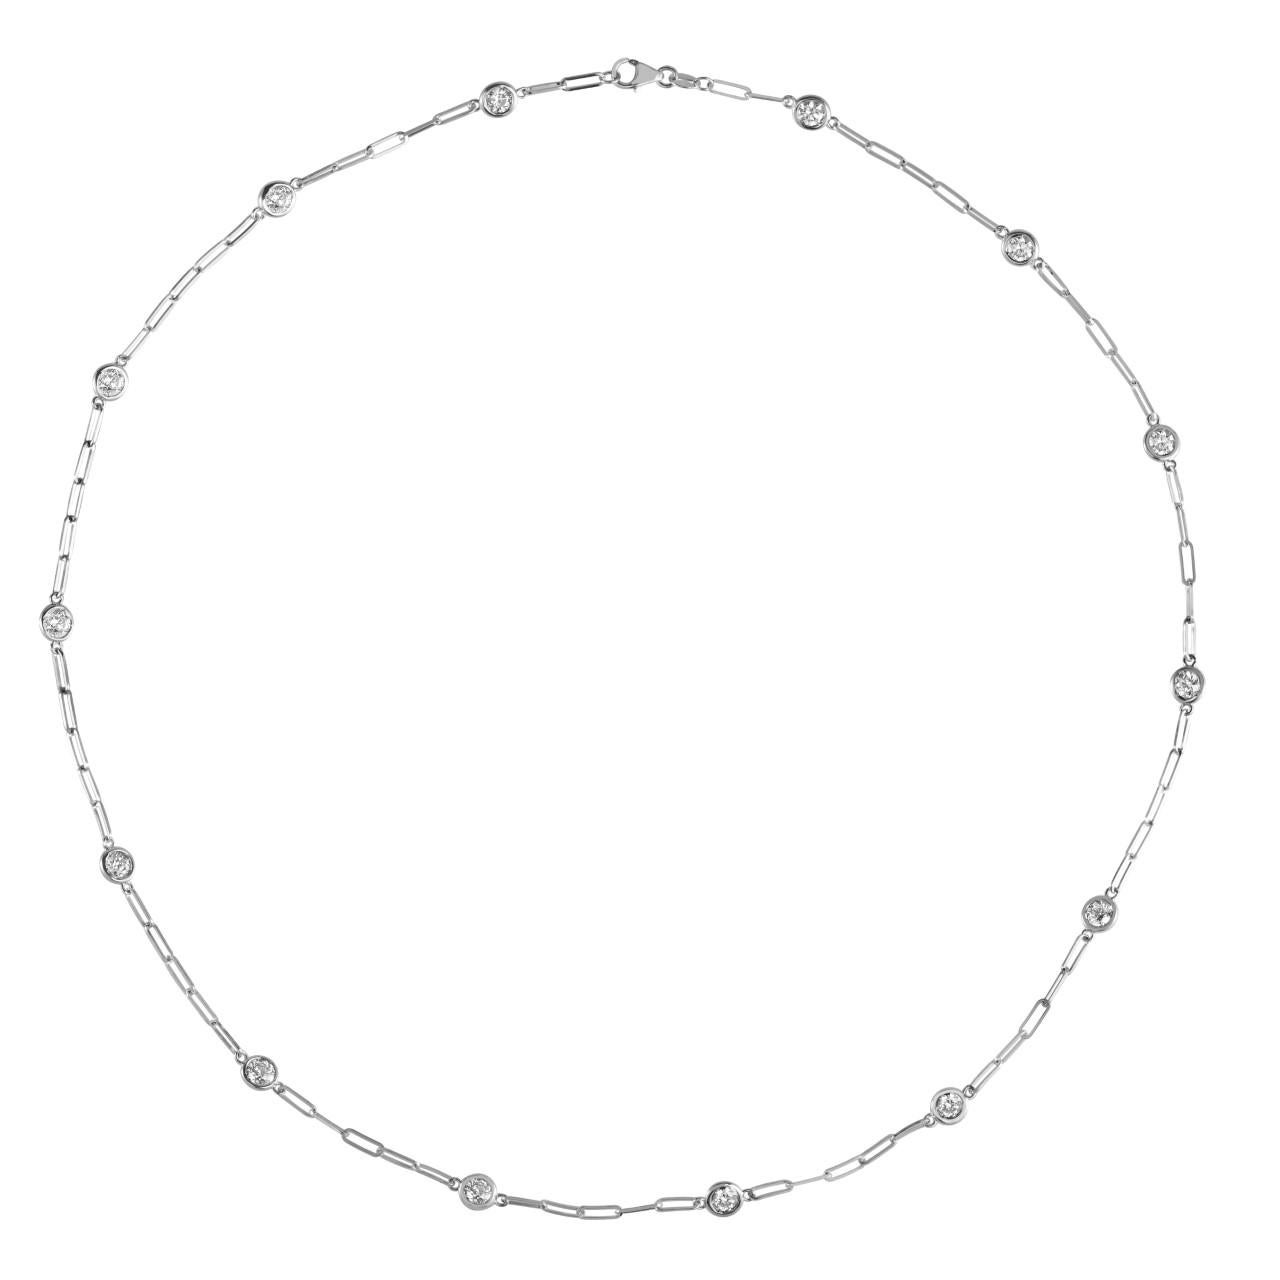 3.50 Carat Diamond by the Yard Paper Clip Necklace G SI 14K White Gold 14 stones 18 inches

100% Natural Diamonds, Not Enhanced in any way
3.50CT
G-H 
SI  
14K White Gold, Bezel style, 5 gram
1/5